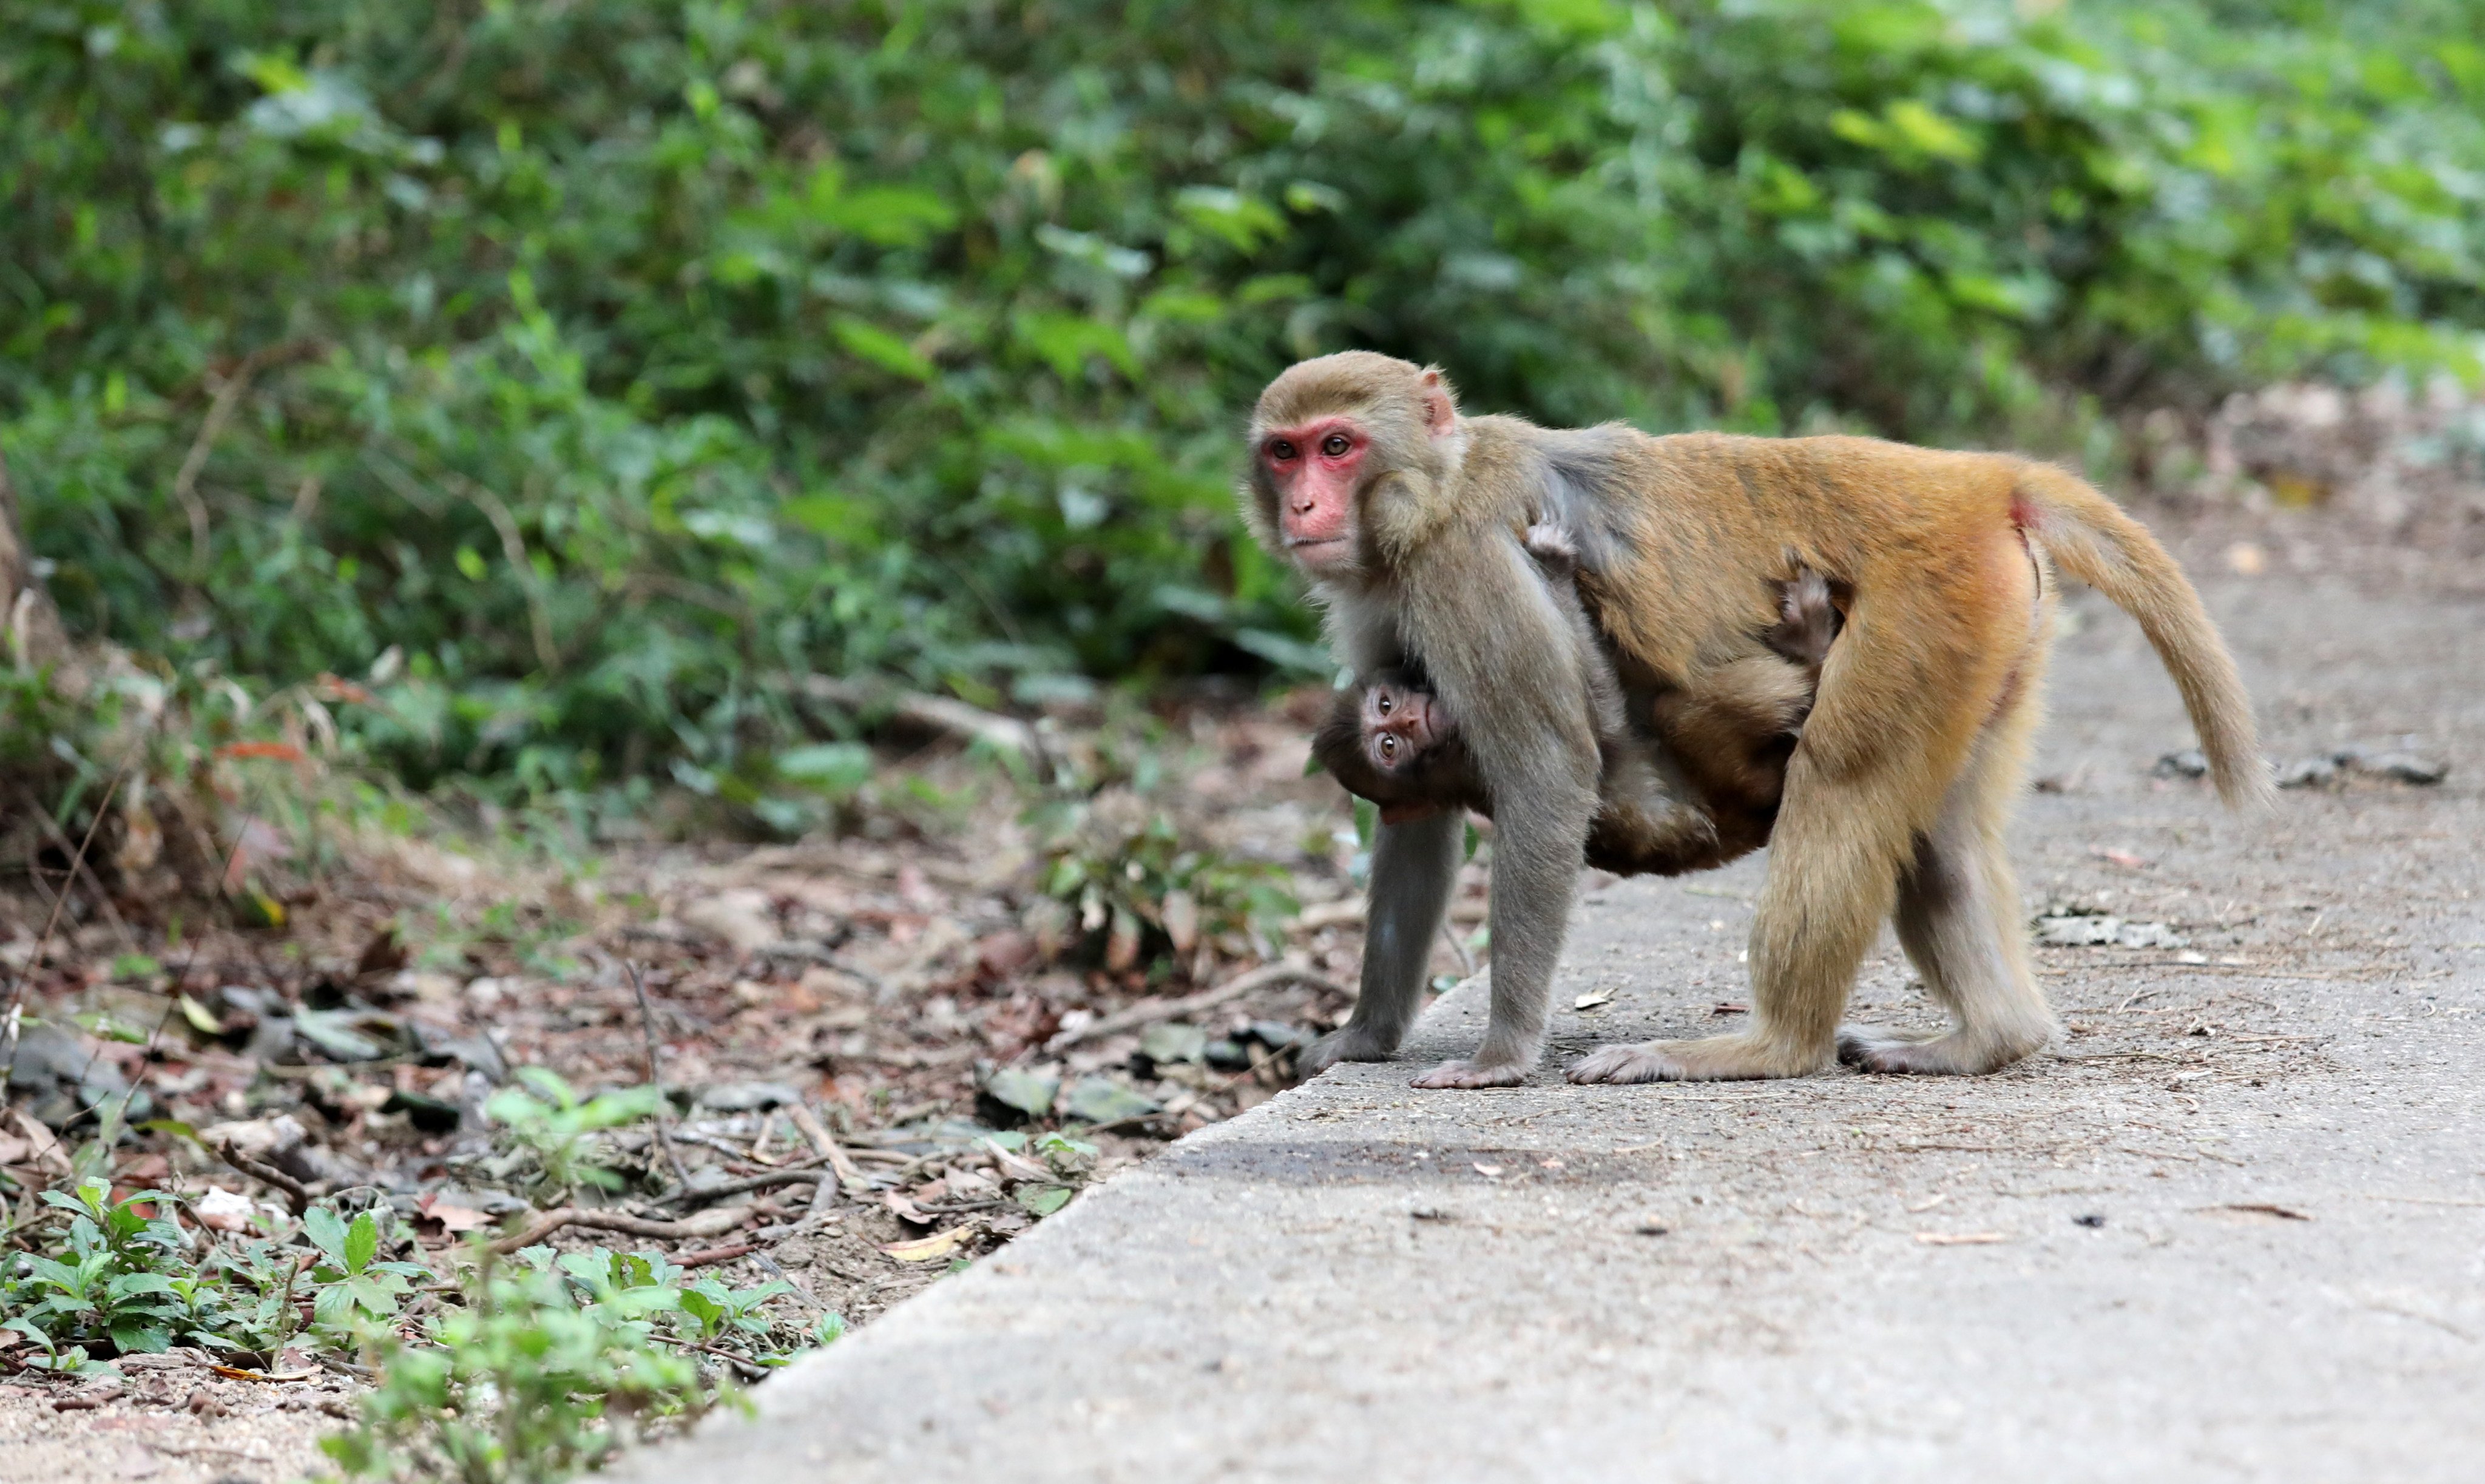 Wild monkeys in Hong Kong. Authorities have urged residents to keep their distance from the animals. Photo: Felix Wong